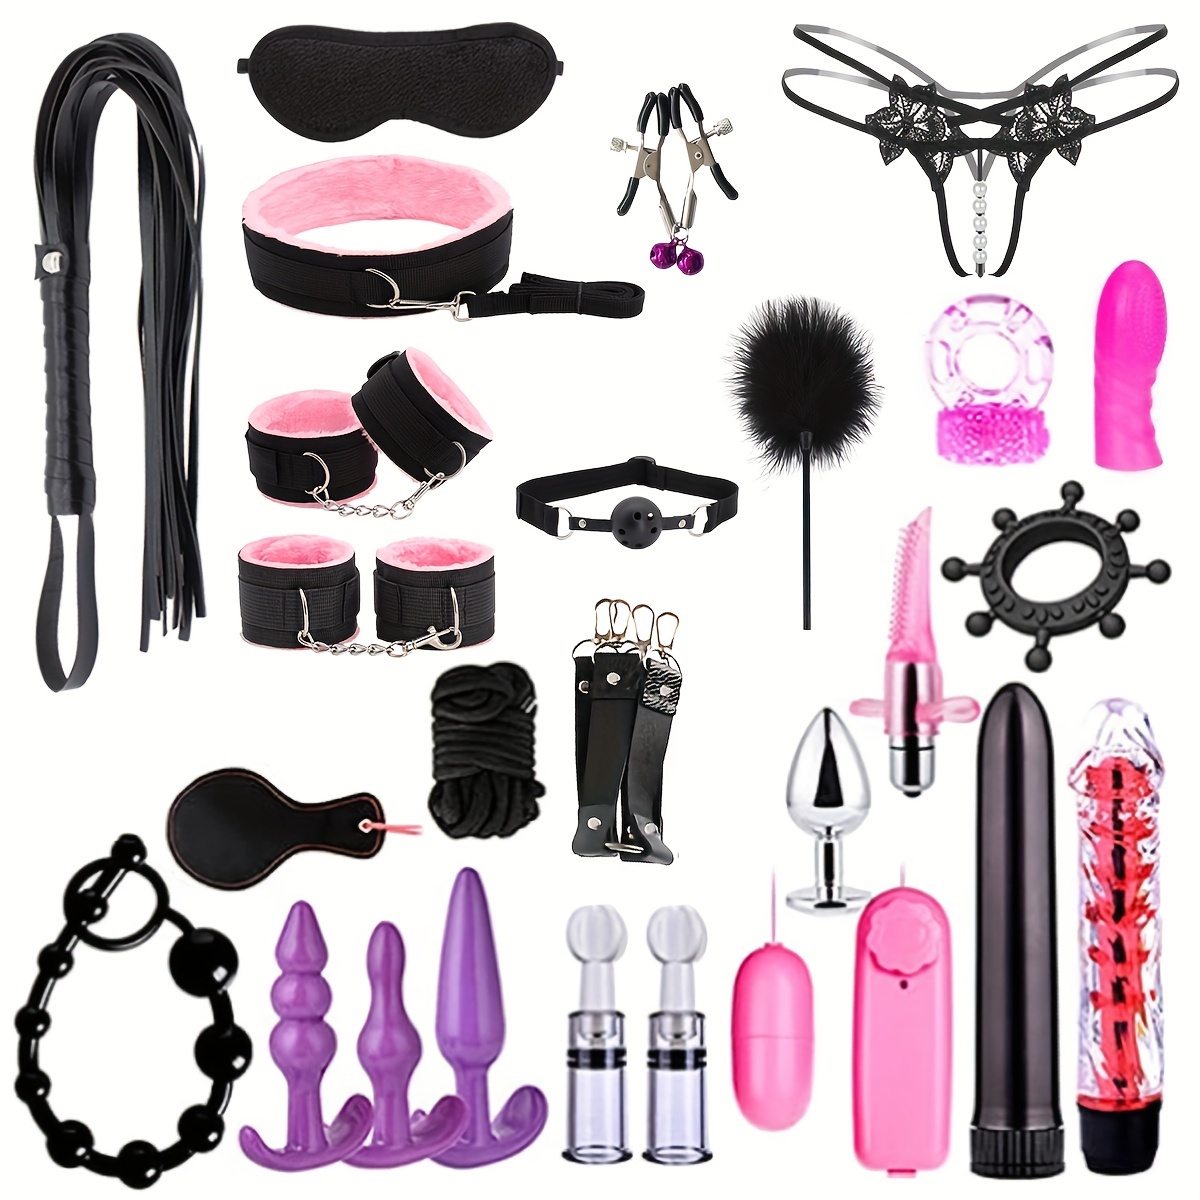 BDSM Bondage Set; Erotic Bed Games; Adults Handcuffs; Nipple Clamps; Whip  Spanking Anal Plug Vibrator SM Kit; Sex Toys For Couples